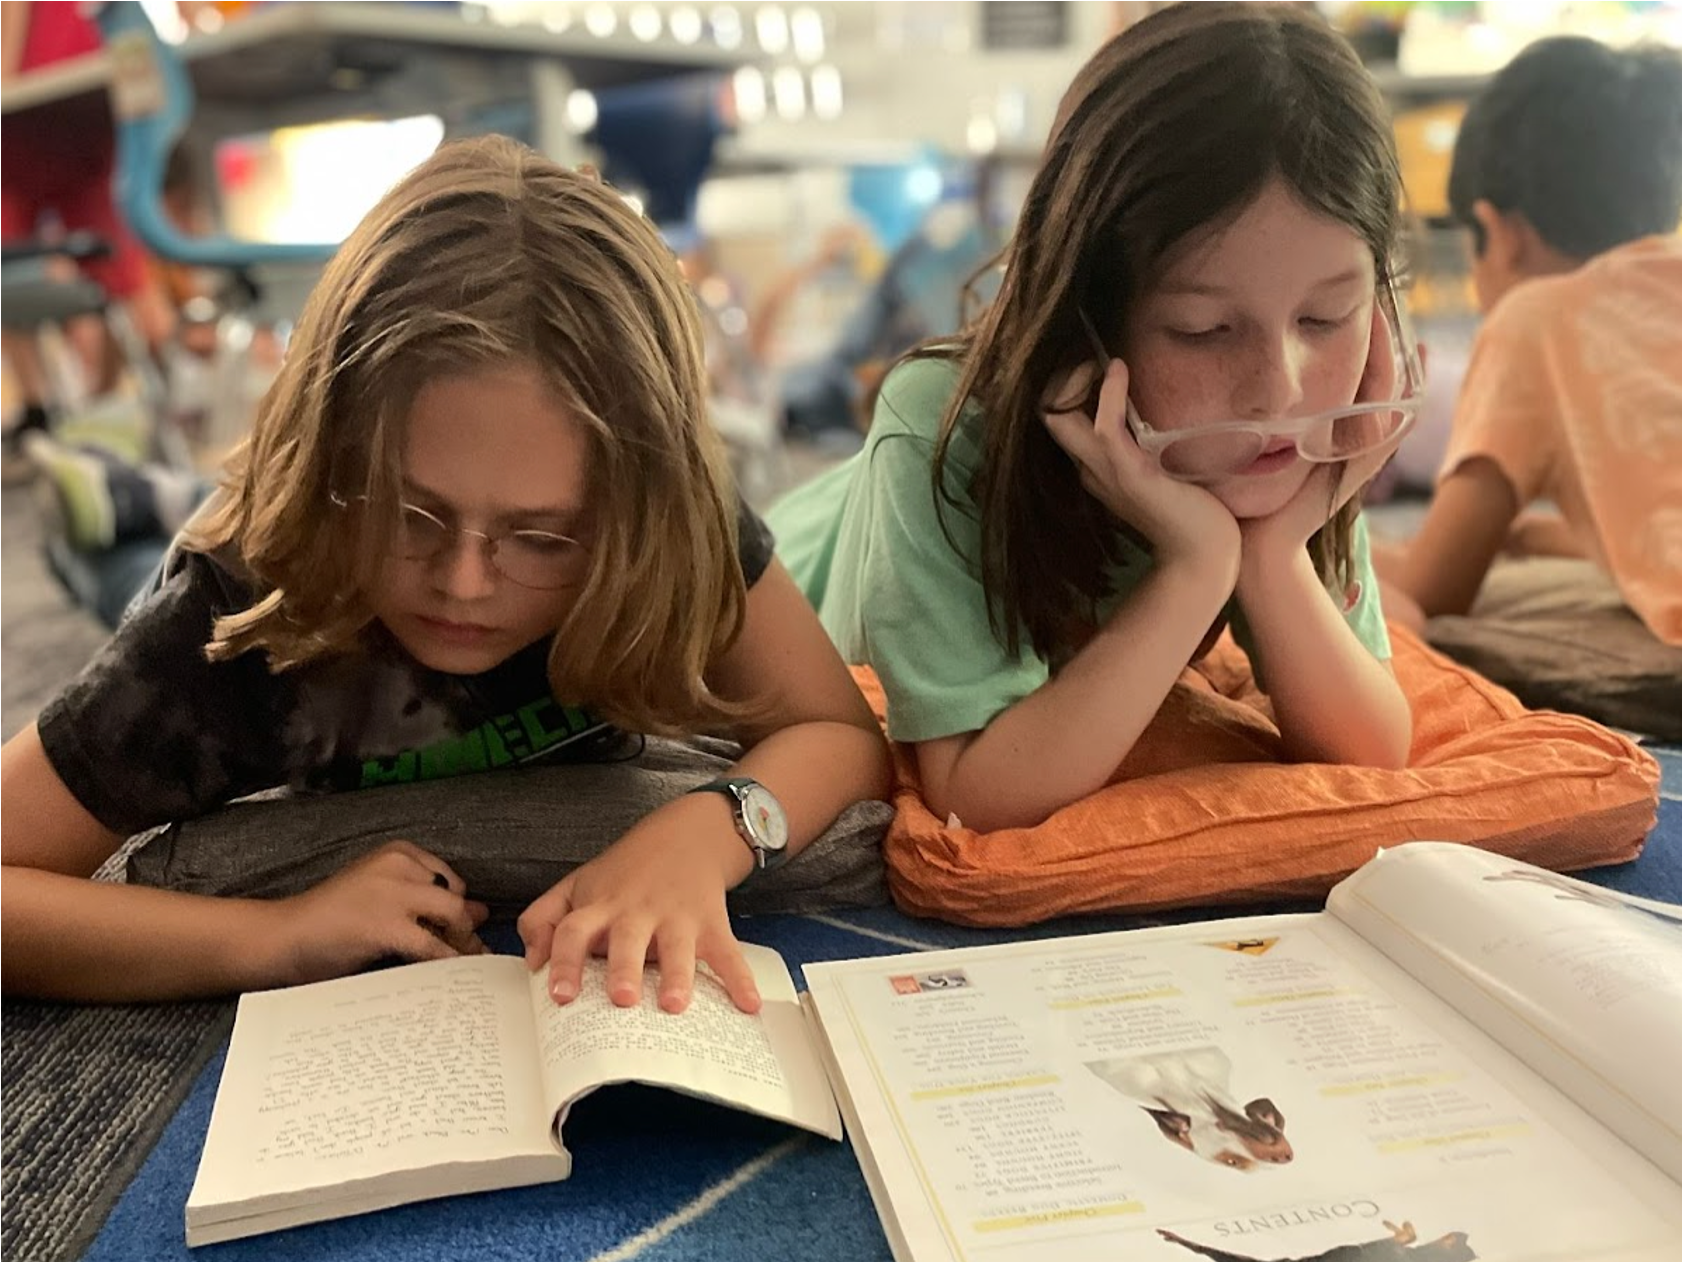 Third Graders Practice “Real Reading” with a Charming Story about Friendship